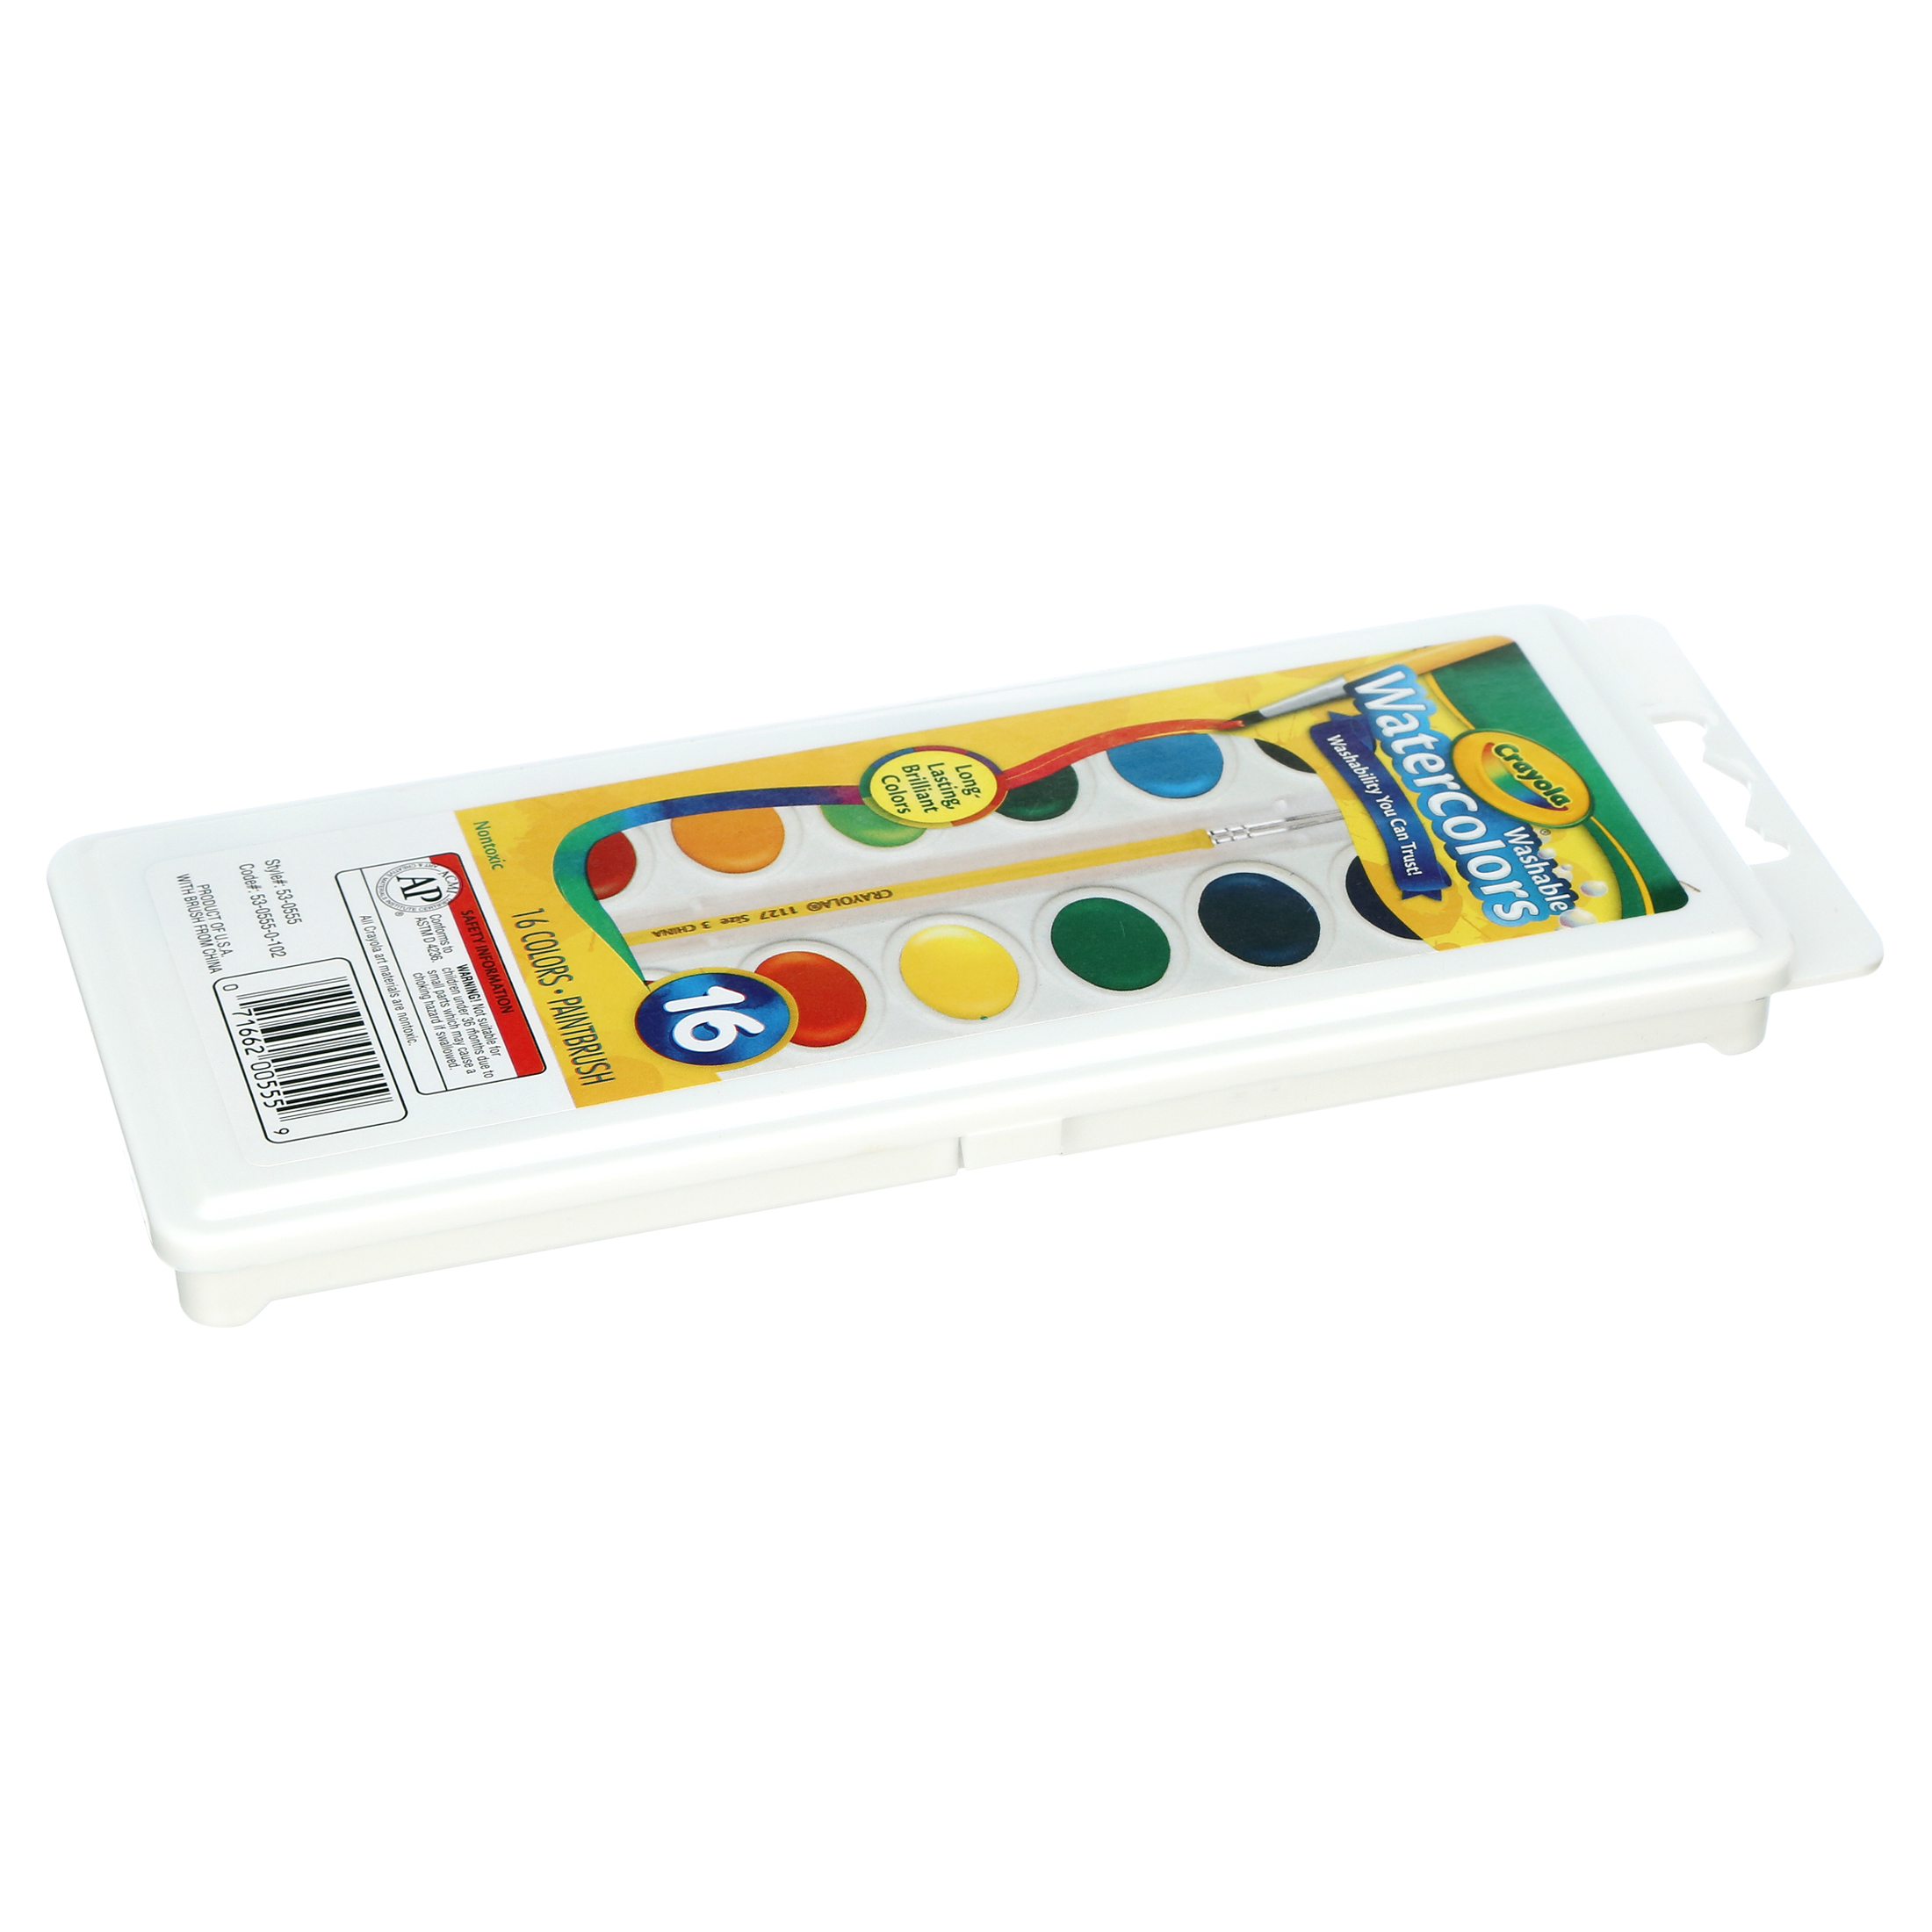 Crayola Washable Watercolor Set, 16-Colors - image 4 of 6